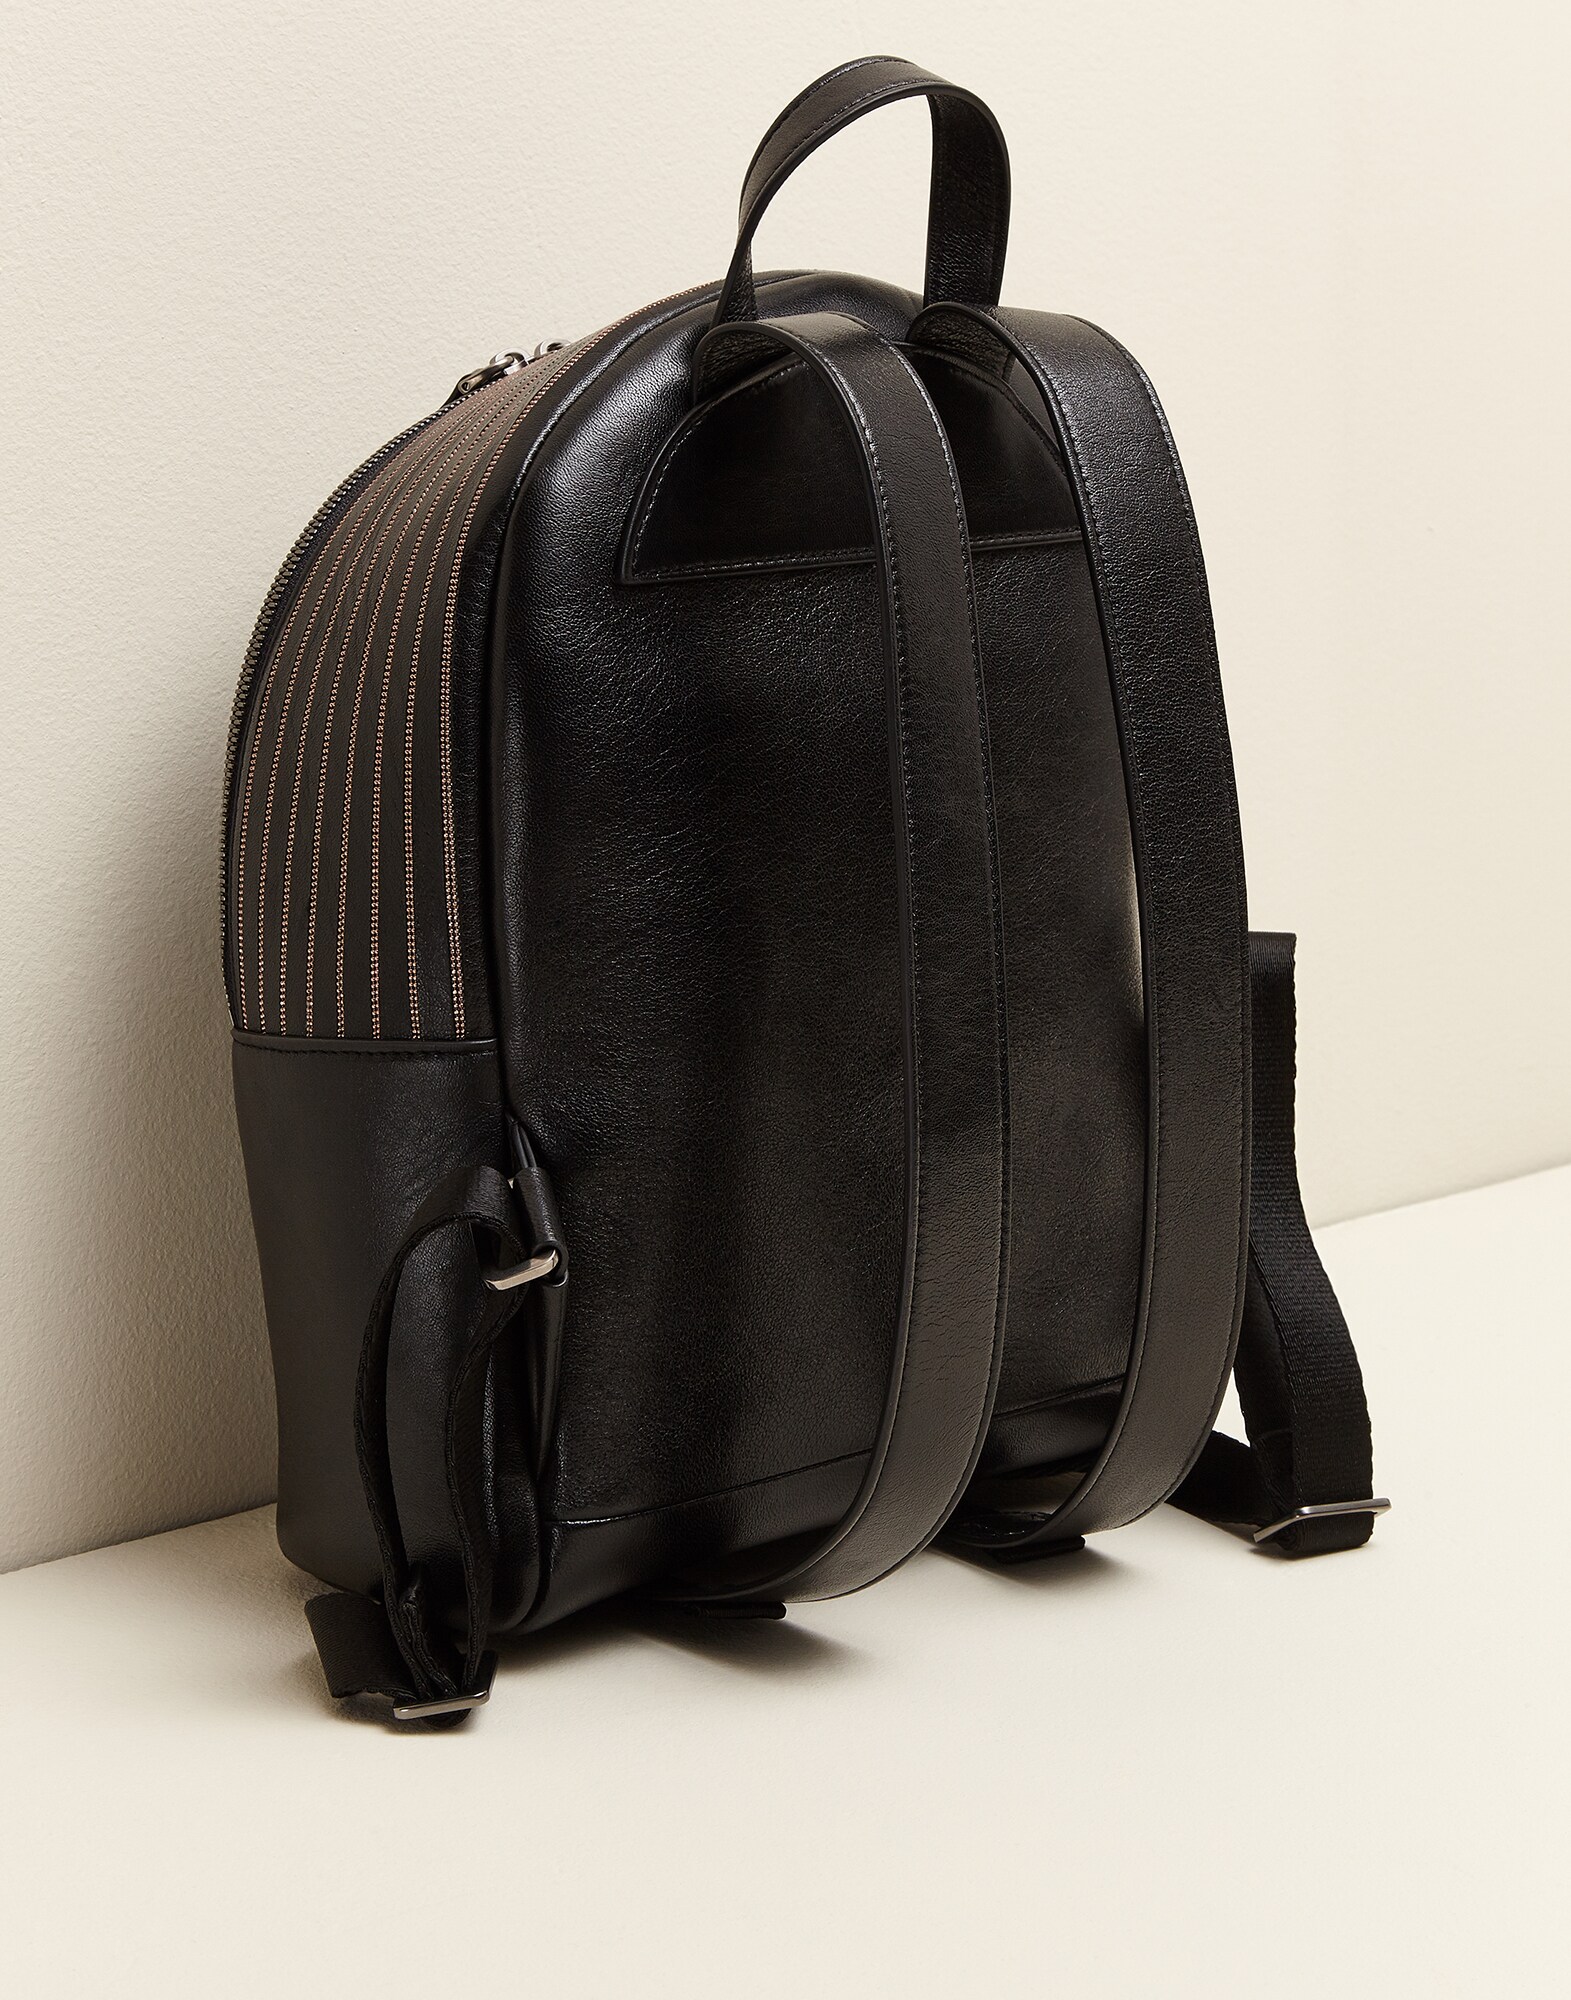 Nappa leather backpack